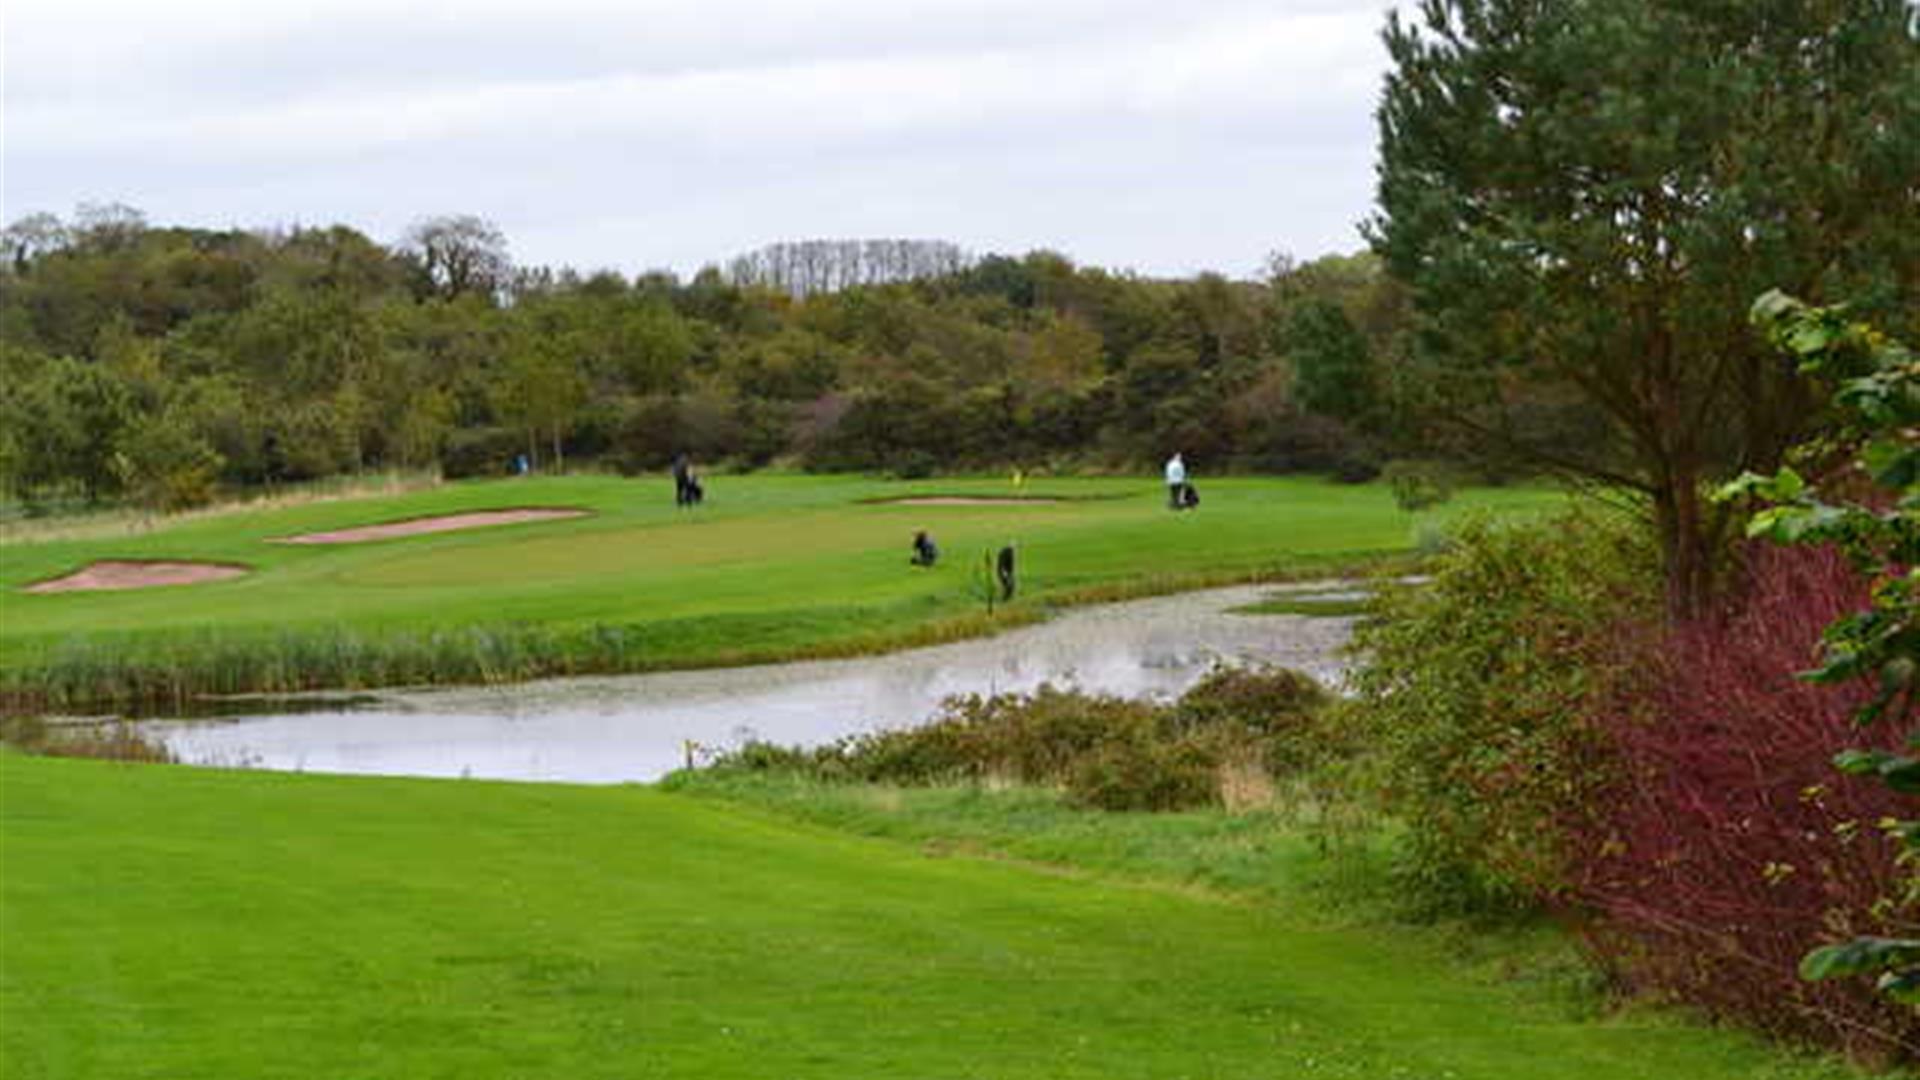 Photo of golfers in play on the green